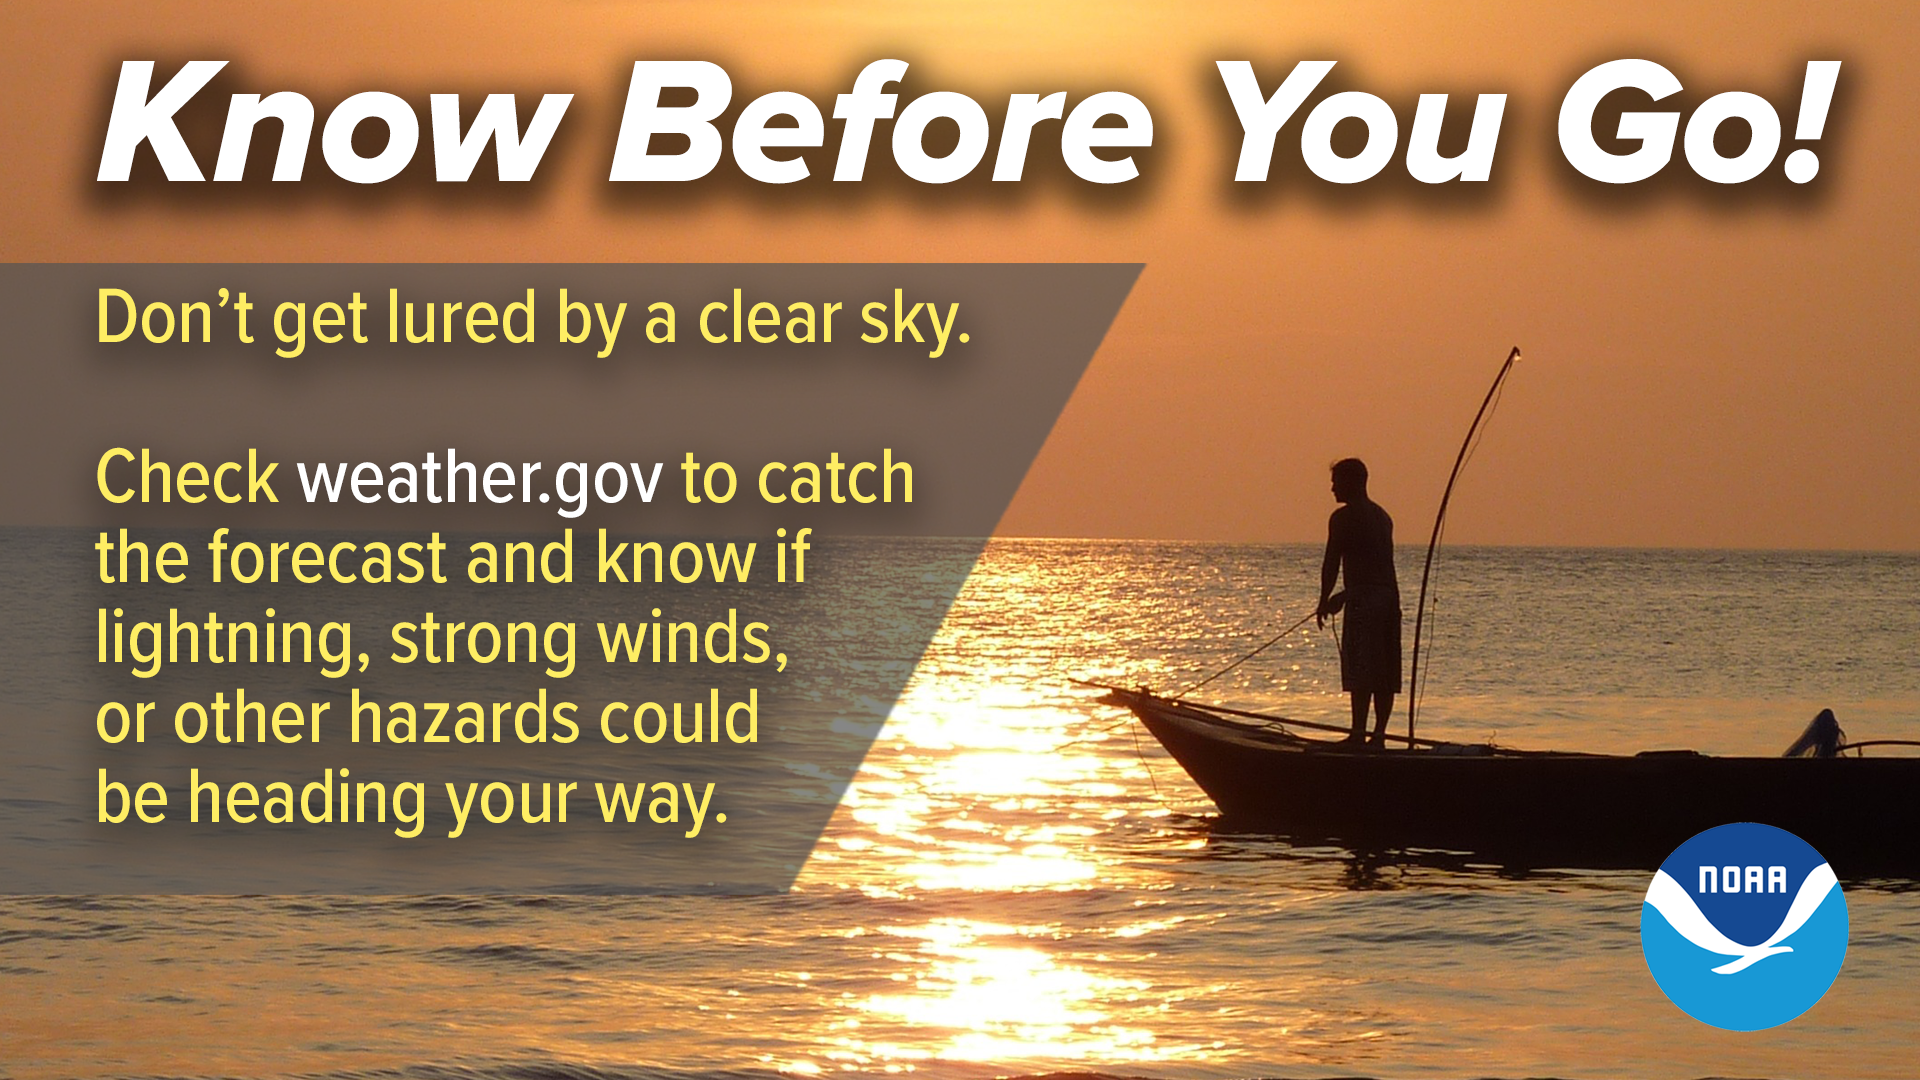 Know Before You Go! Don't get lured by a clear sky. Check weather.gov to catch the forecast and know if lightning, strong winds, or other hazards could be heading your way.